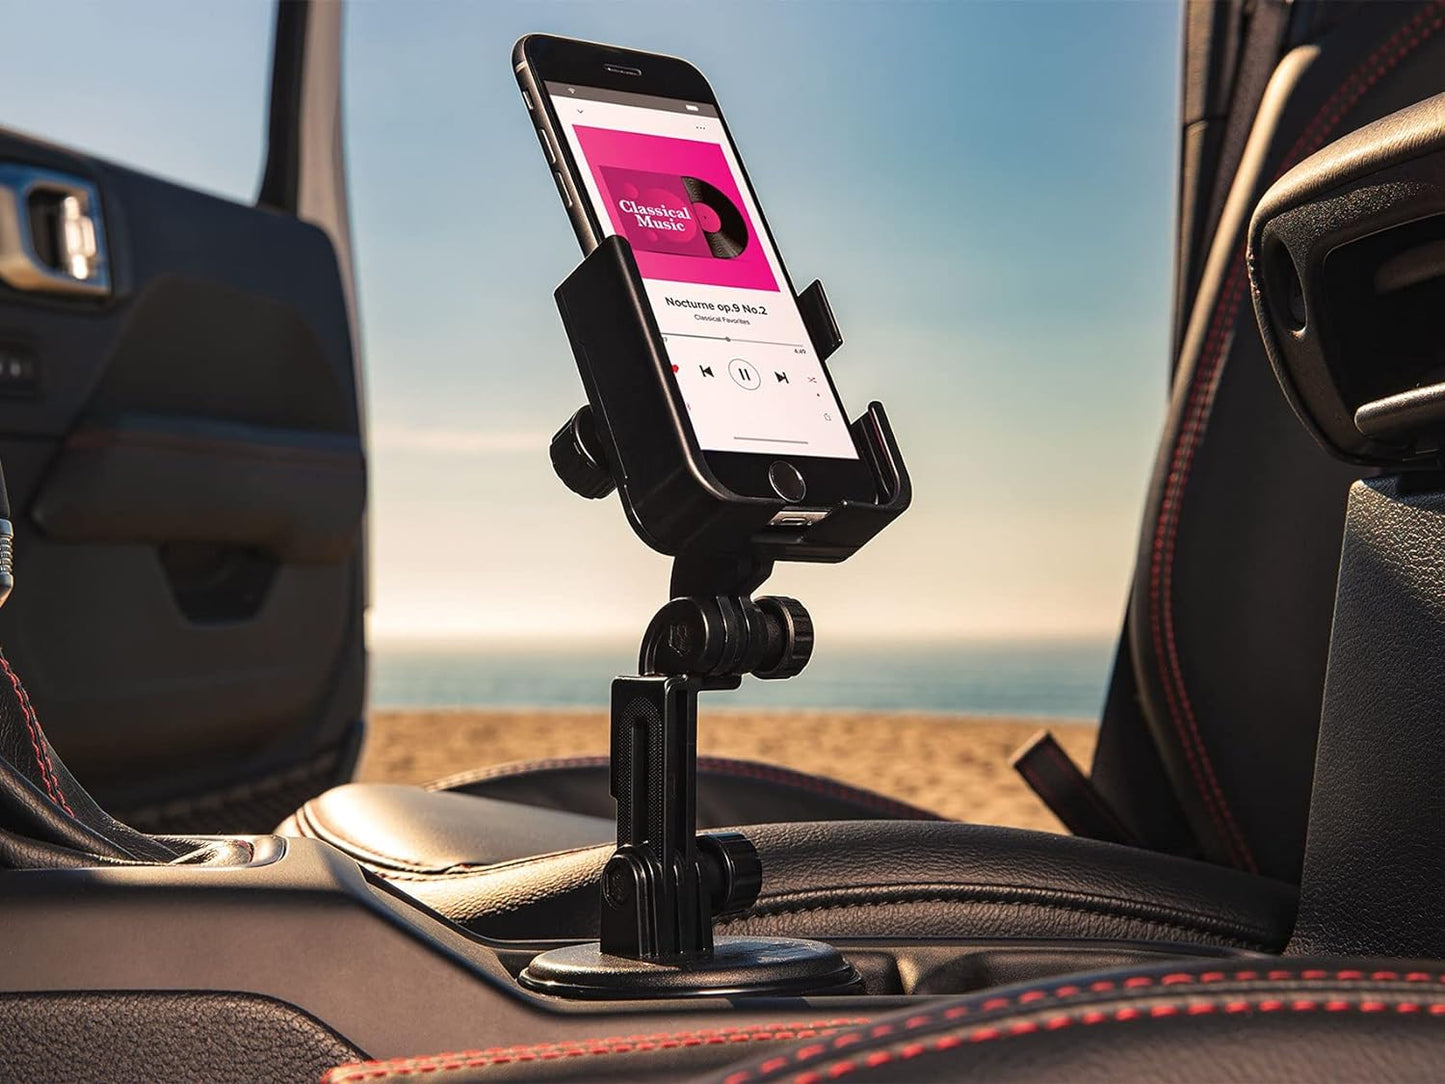 WeatherTech CupFone XL with Extension \u2013 Adjustable, Universal Cup Holder Phone Mount Accessory for Car \u2013 Compatible with iPhone & Other Smartphones \u2013 Open Access Design for Cell Phone Charging